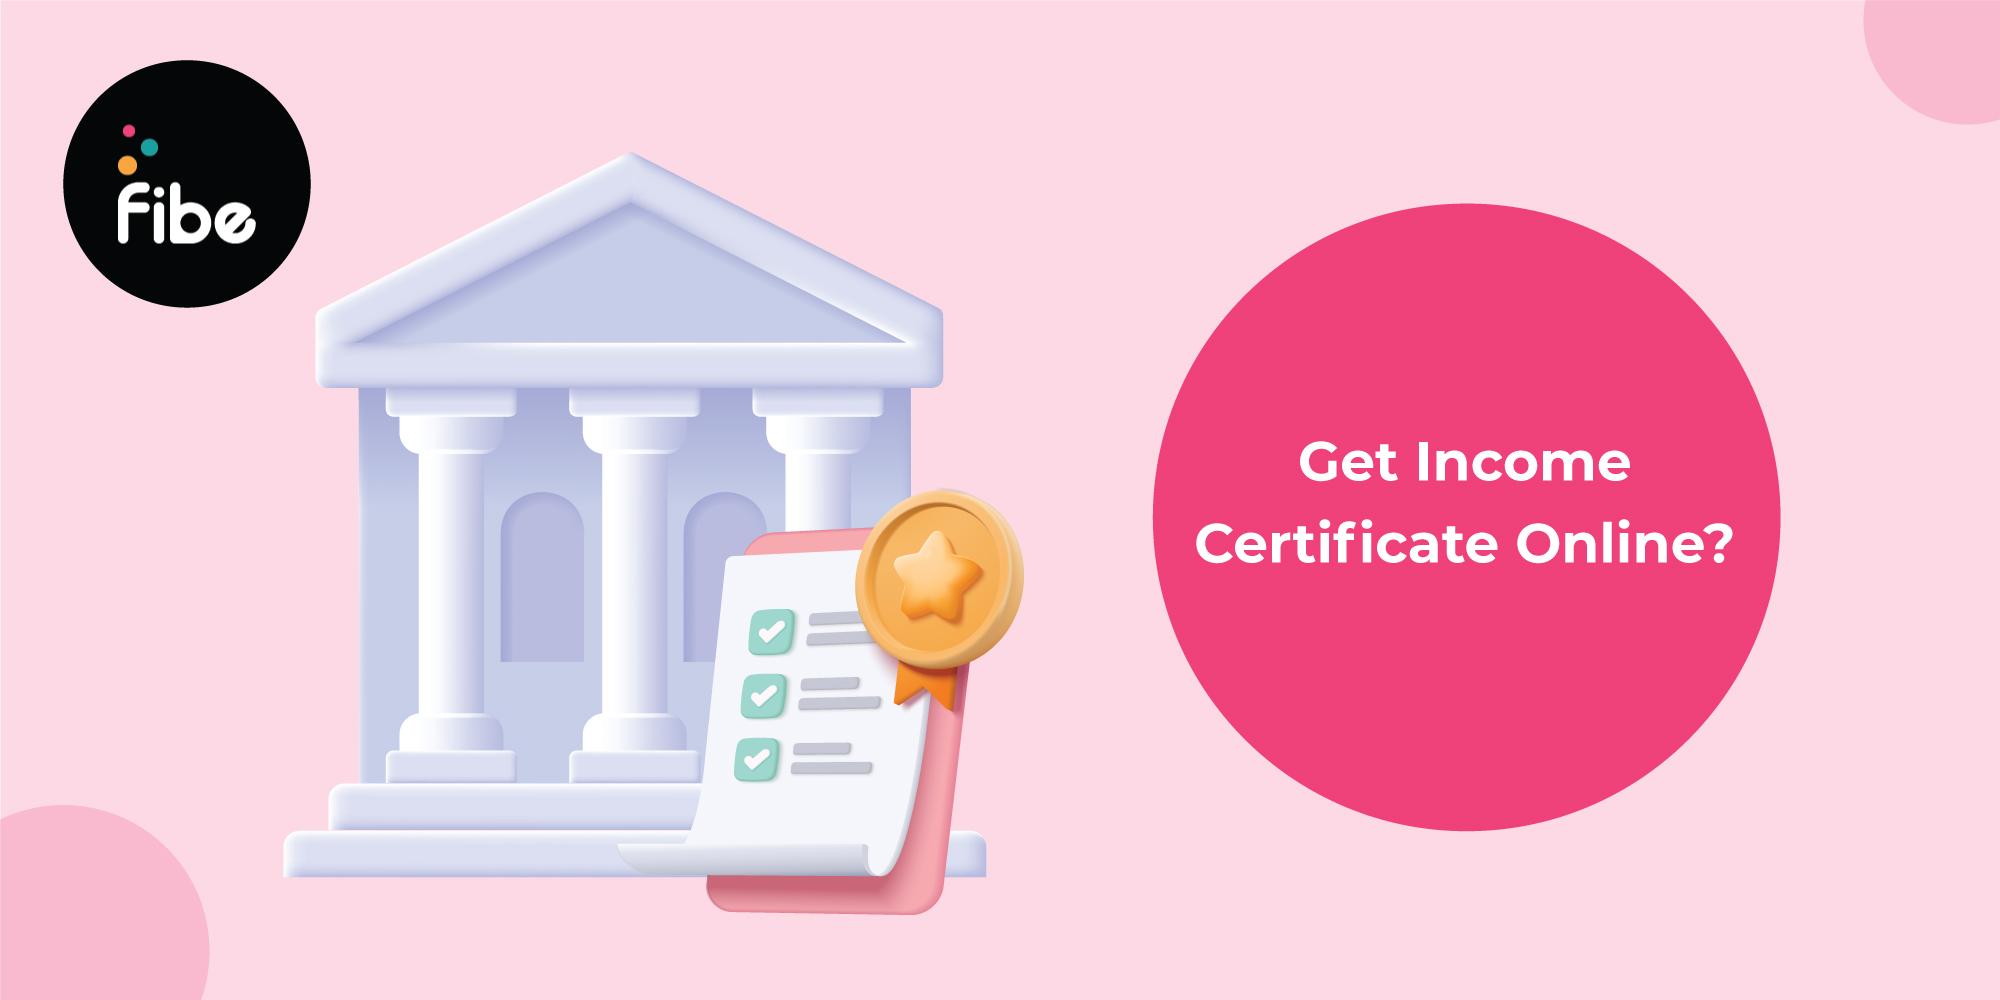 How To Download Income Certificate Online: Step-by-Step Guide